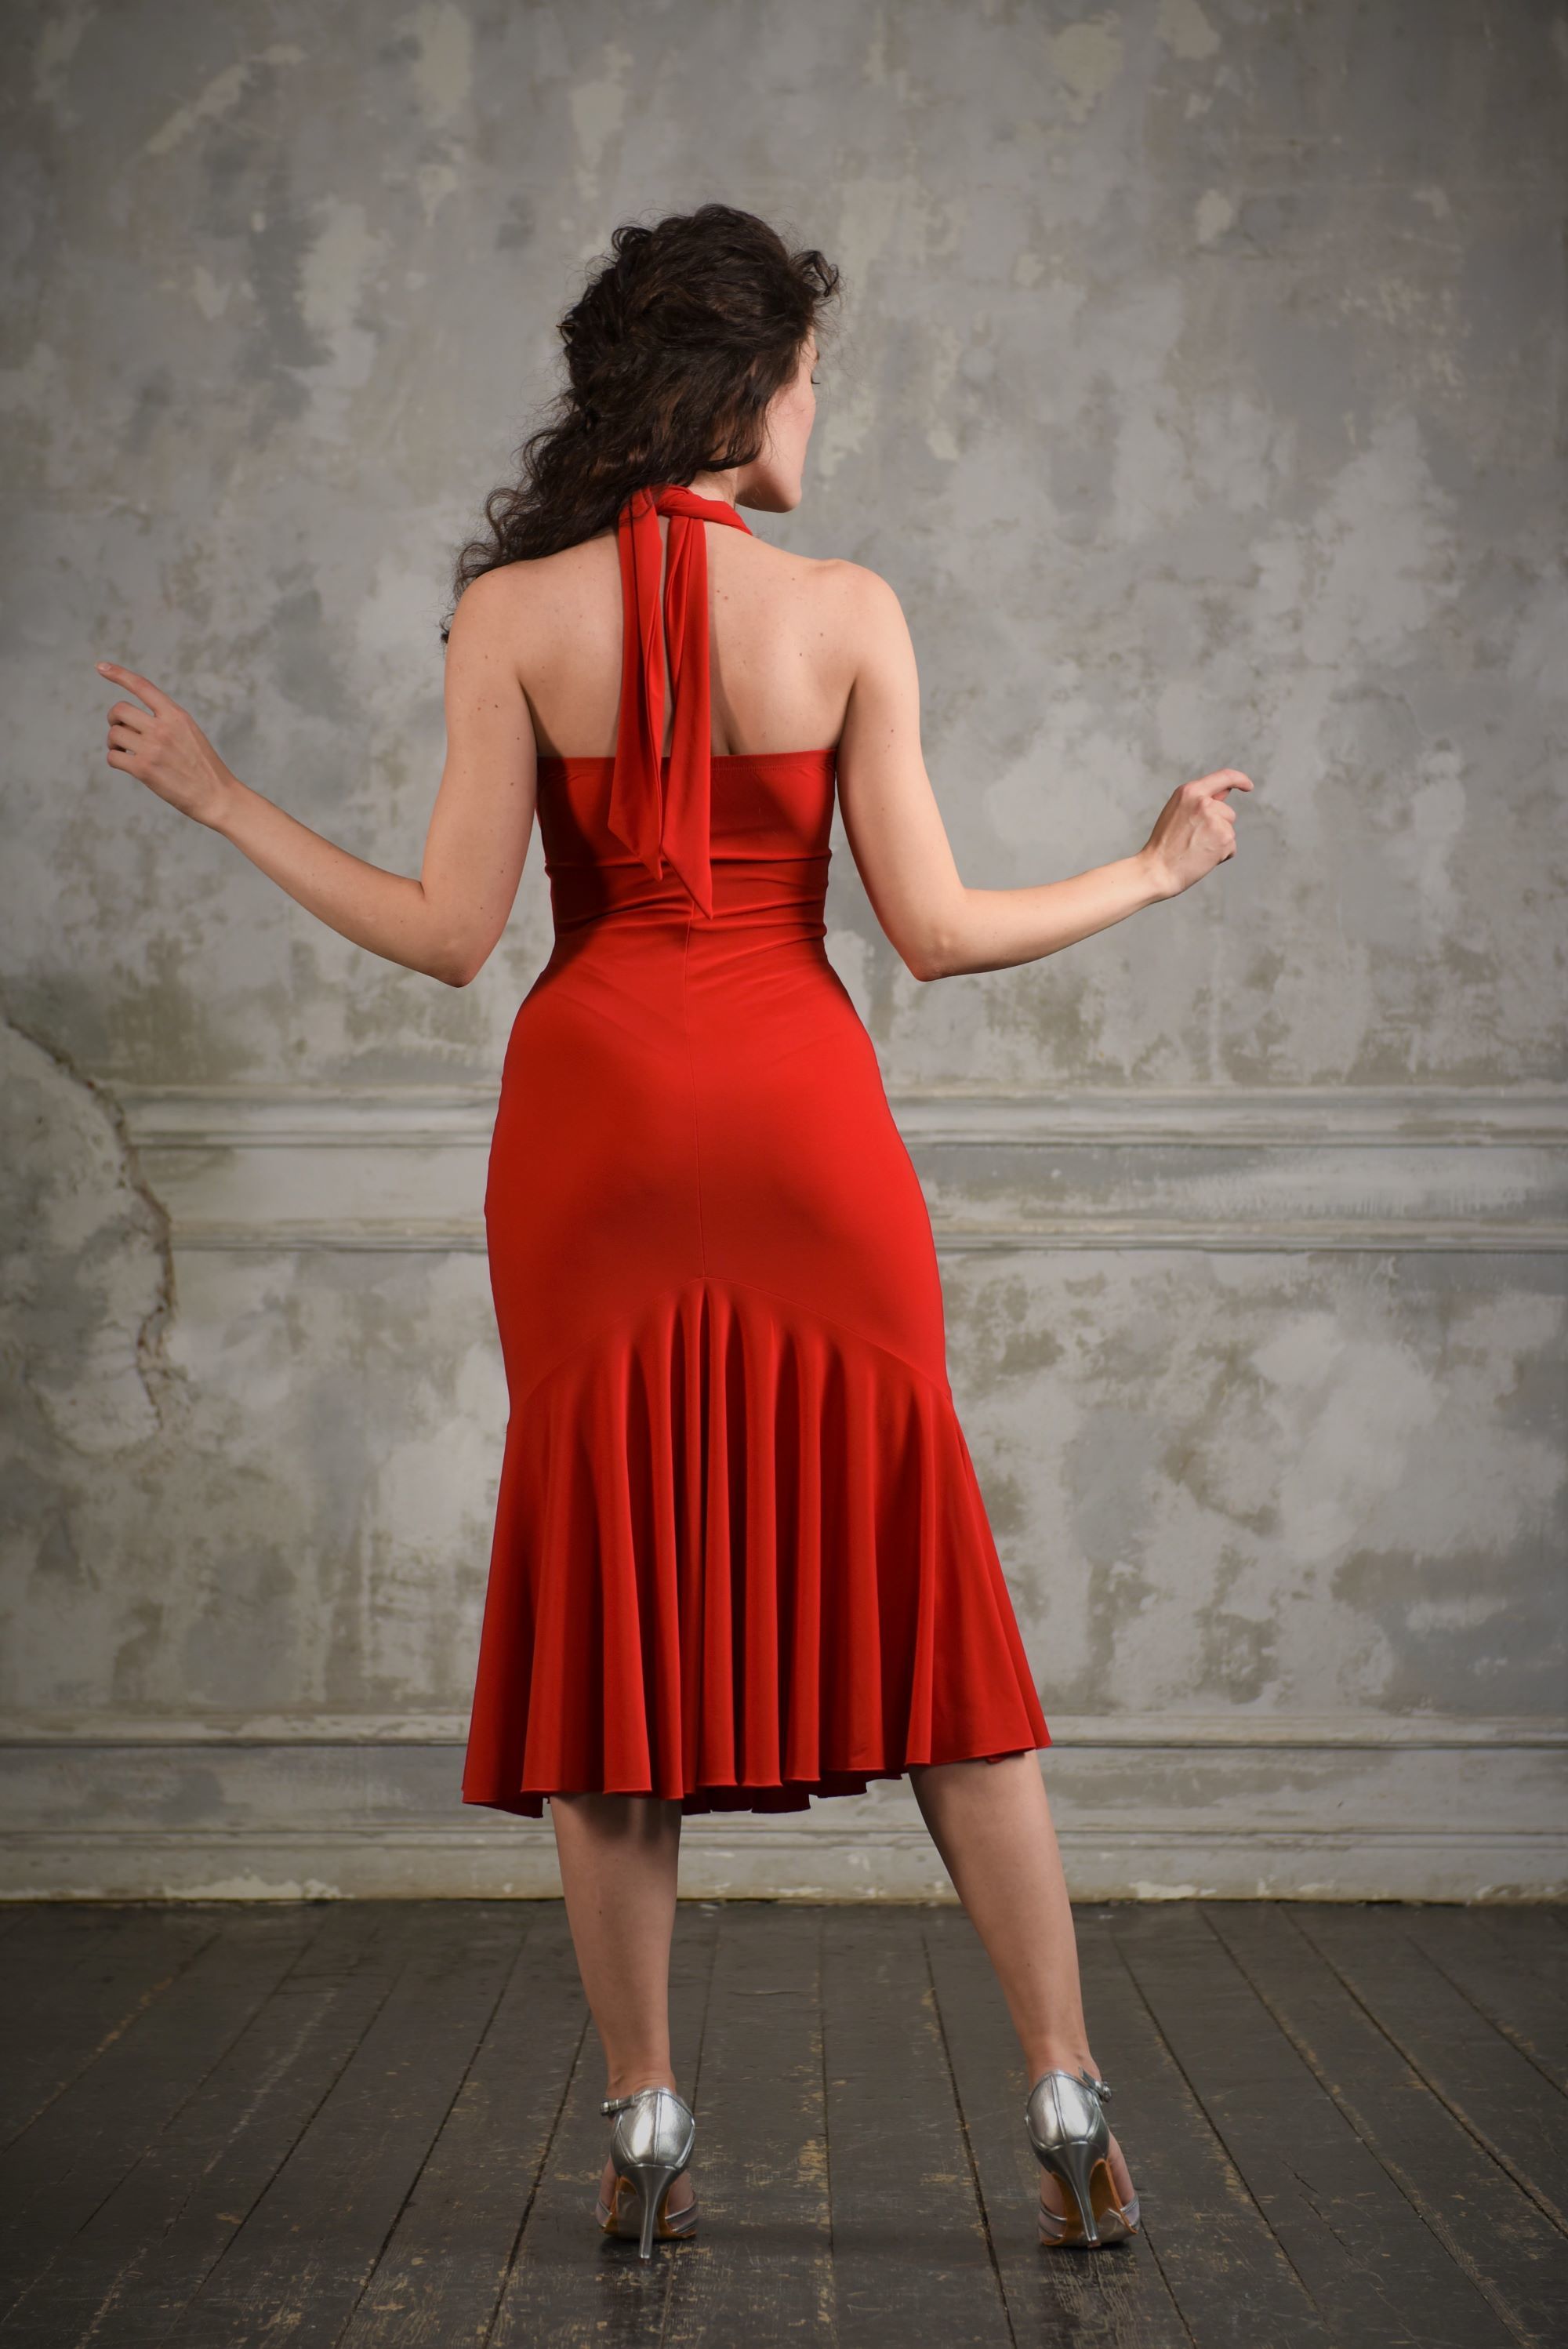 Landschap Momentum Ernest Shackleton Red tango dress by StudioMoscow